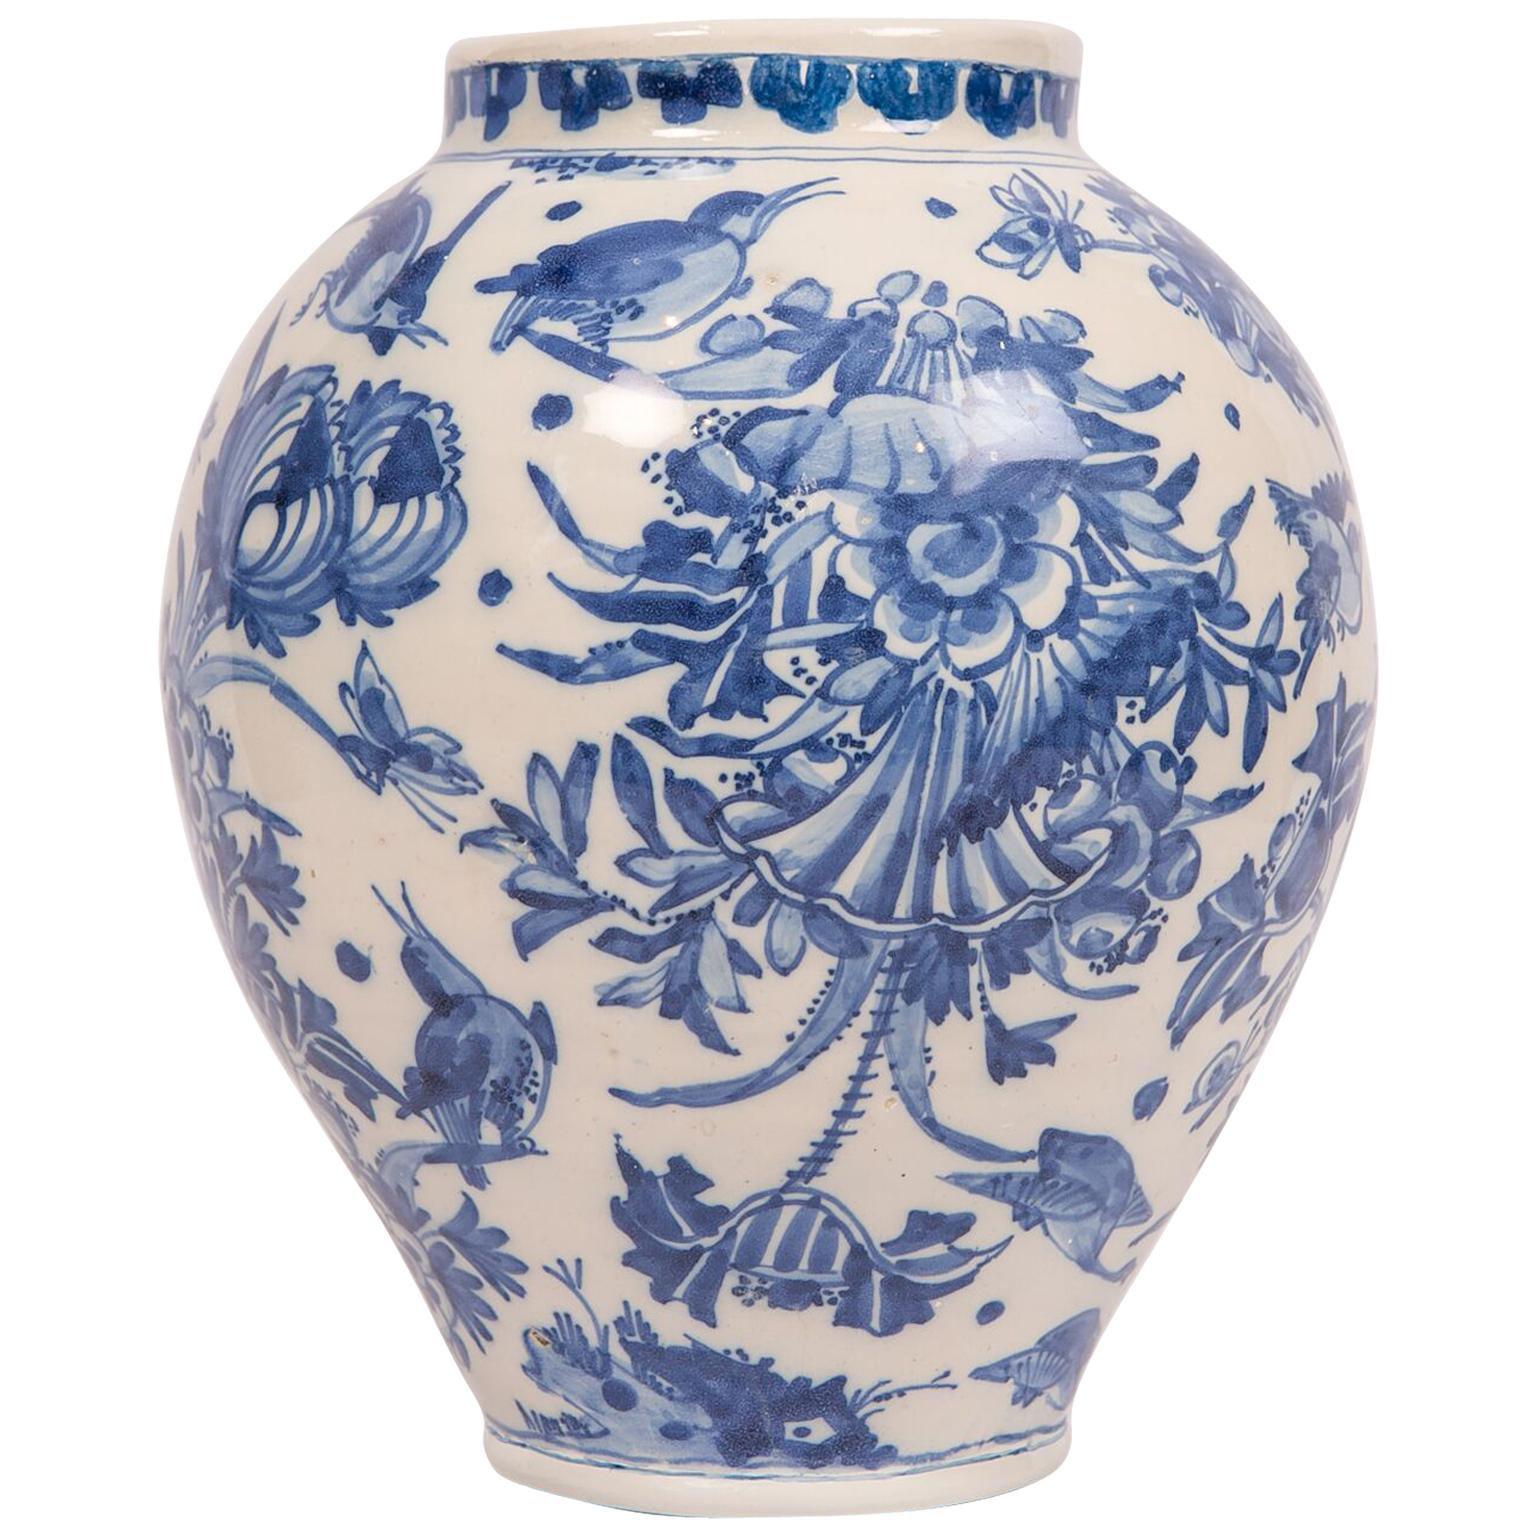 London Delftware Blue and White Flower Vase 17th Century circa 1685